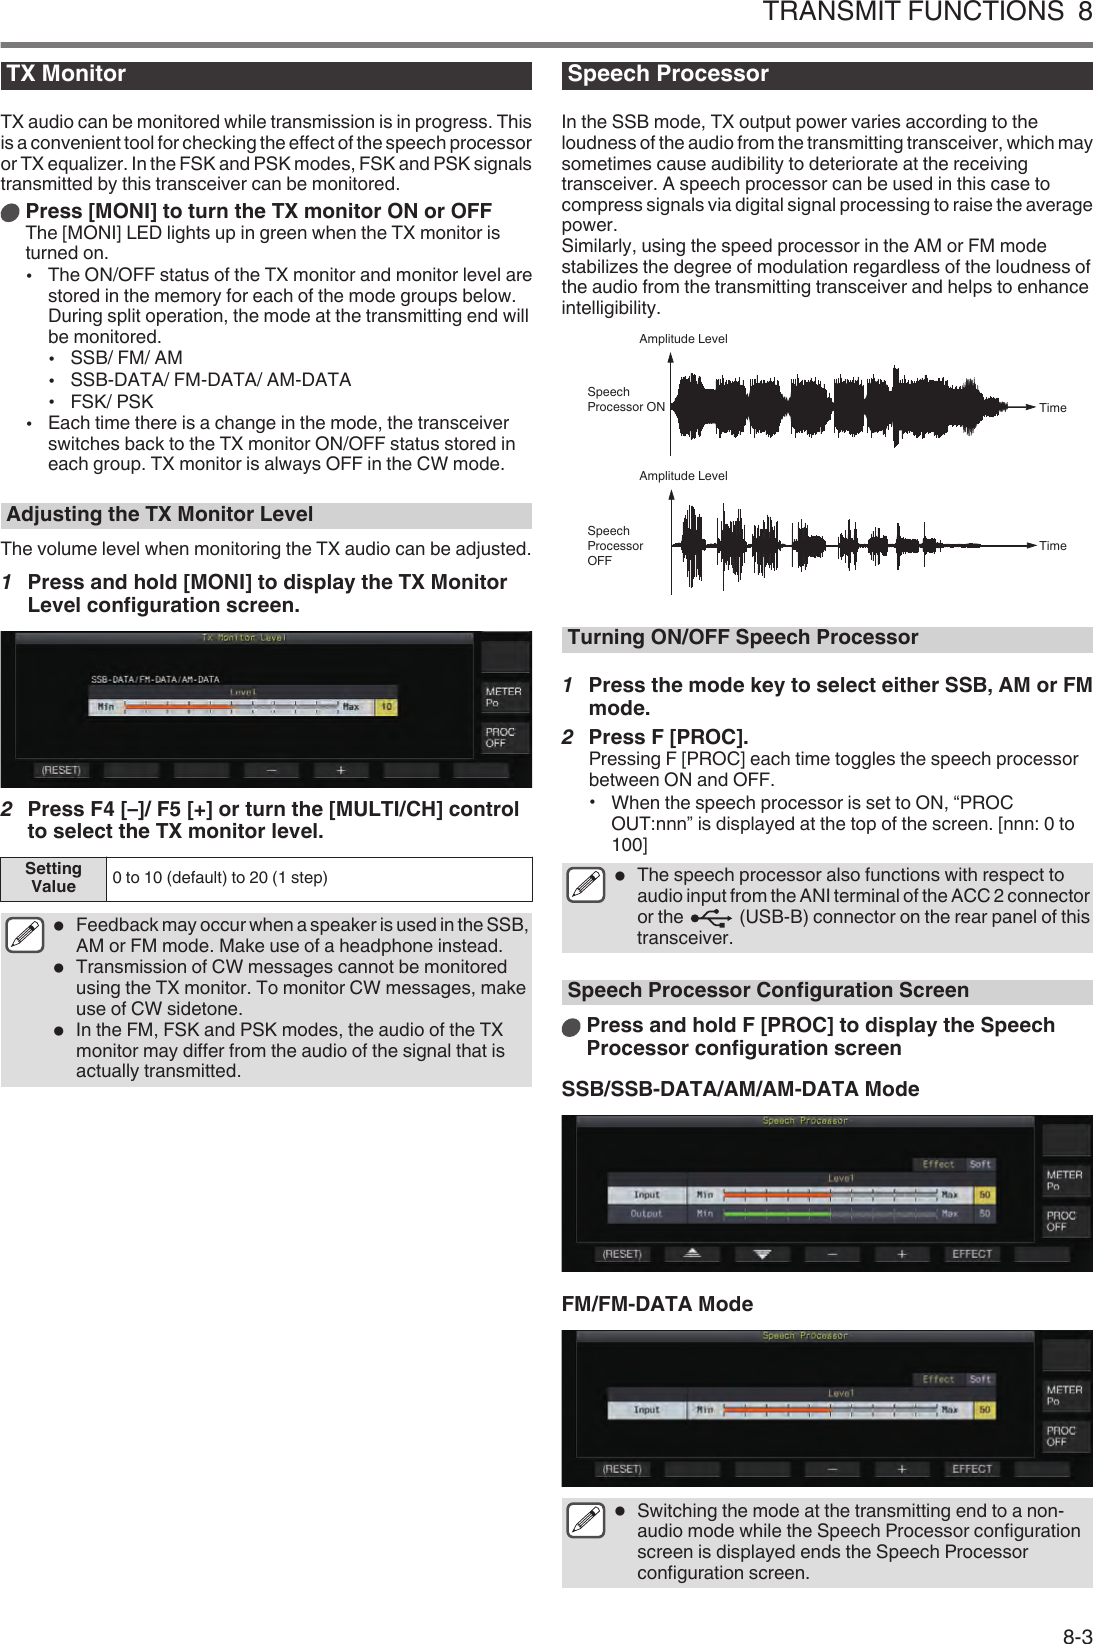 TX MonitorTX audio can be monitored while transmission is in progress. Thisis a convenient tool for checking the effect of the speech processoror TX equalizer. In the FSK and PSK modes, FSK and PSK signalstransmitted by this transceiver can be monitored.Press [MONI] to turn the TX monitor ON or OFFThe [MONI] LED lights up in green when the TX monitor isturned on.•The ON/OFF status of the TX monitor and monitor level arestored in the memory for each of the mode groups below.During split operation, the mode at the transmitting end willbe monitored.•SSB/ FM/ AM•SSB-DATA/ FM-DATA/ AM-DATA•FSK/ PSK•Each time there is a change in the mode, the transceiverswitches back to the TX monitor ON/OFF status stored ineach group. TX monitor is always OFF in the CW mode.Adjusting the TX Monitor LevelThe volume level when monitoring the TX audio can be adjusted.1Press and hold [MONI] to display the TX MonitorLevel configuration screen..2Press F4 [–]/ F5 [+] or turn the [MULTI/CH] controlto select the TX monitor level.SettingValue 0 to 10 (default) to 20 (1 step)●Feedback may occur when a speaker is used in the SSB,AM or FM mode. Make use of a headphone instead.●Transmission of CW messages cannot be monitoredusing the TX monitor. To monitor CW messages, makeuse of CW sidetone.●In the FM, FSK and PSK modes, the audio of the TXmonitor may differ from the audio of the signal that isactually transmitted.Speech ProcessorIn the SSB mode, TX output power varies according to theloudness of the audio from the transmitting transceiver, which maysometimes cause audibility to deteriorate at the receivingtransceiver. A speech processor can be used in this case tocompress signals via digital signal processing to raise the averagepower.Similarly, using the speed processor in the AM or FM modestabilizes the degree of modulation regardless of the loudness ofthe audio from the transmitting transceiver and helps to enhanceintelligibility..TimeSpeech Processor OFFAmplitude LevelTimeSpeech Processor ONAmplitude LevelTurning ON/OFF Speech Processor1Press the mode key to select either SSB, AM or FMmode.2Press F [PROC].Pressing F [PROC] each time toggles the speech processorbetween ON and OFF.•When the speech processor is set to ON, “PROCOUT:nnn” is displayed at the top of the screen. [nnn: 0 to100]●The speech processor also functions with respect toaudio input from the ANI terminal of the ACC 2 connectoror the   (USB-B) connector on the rear panel of thistransceiver.Speech Processor Configuration ScreenPress and hold F [PROC] to display the SpeechProcessor configuration screenSSB/SSB-DATA/AM/AM-DATA Mode.FM/FM-DATA Mode.●Switching the mode at the transmitting end to a non-audio mode while the Speech Processor configurationscreen is displayed ends the Speech Processorconfiguration screen.TRANSMIT FUNCTIONS  88-3